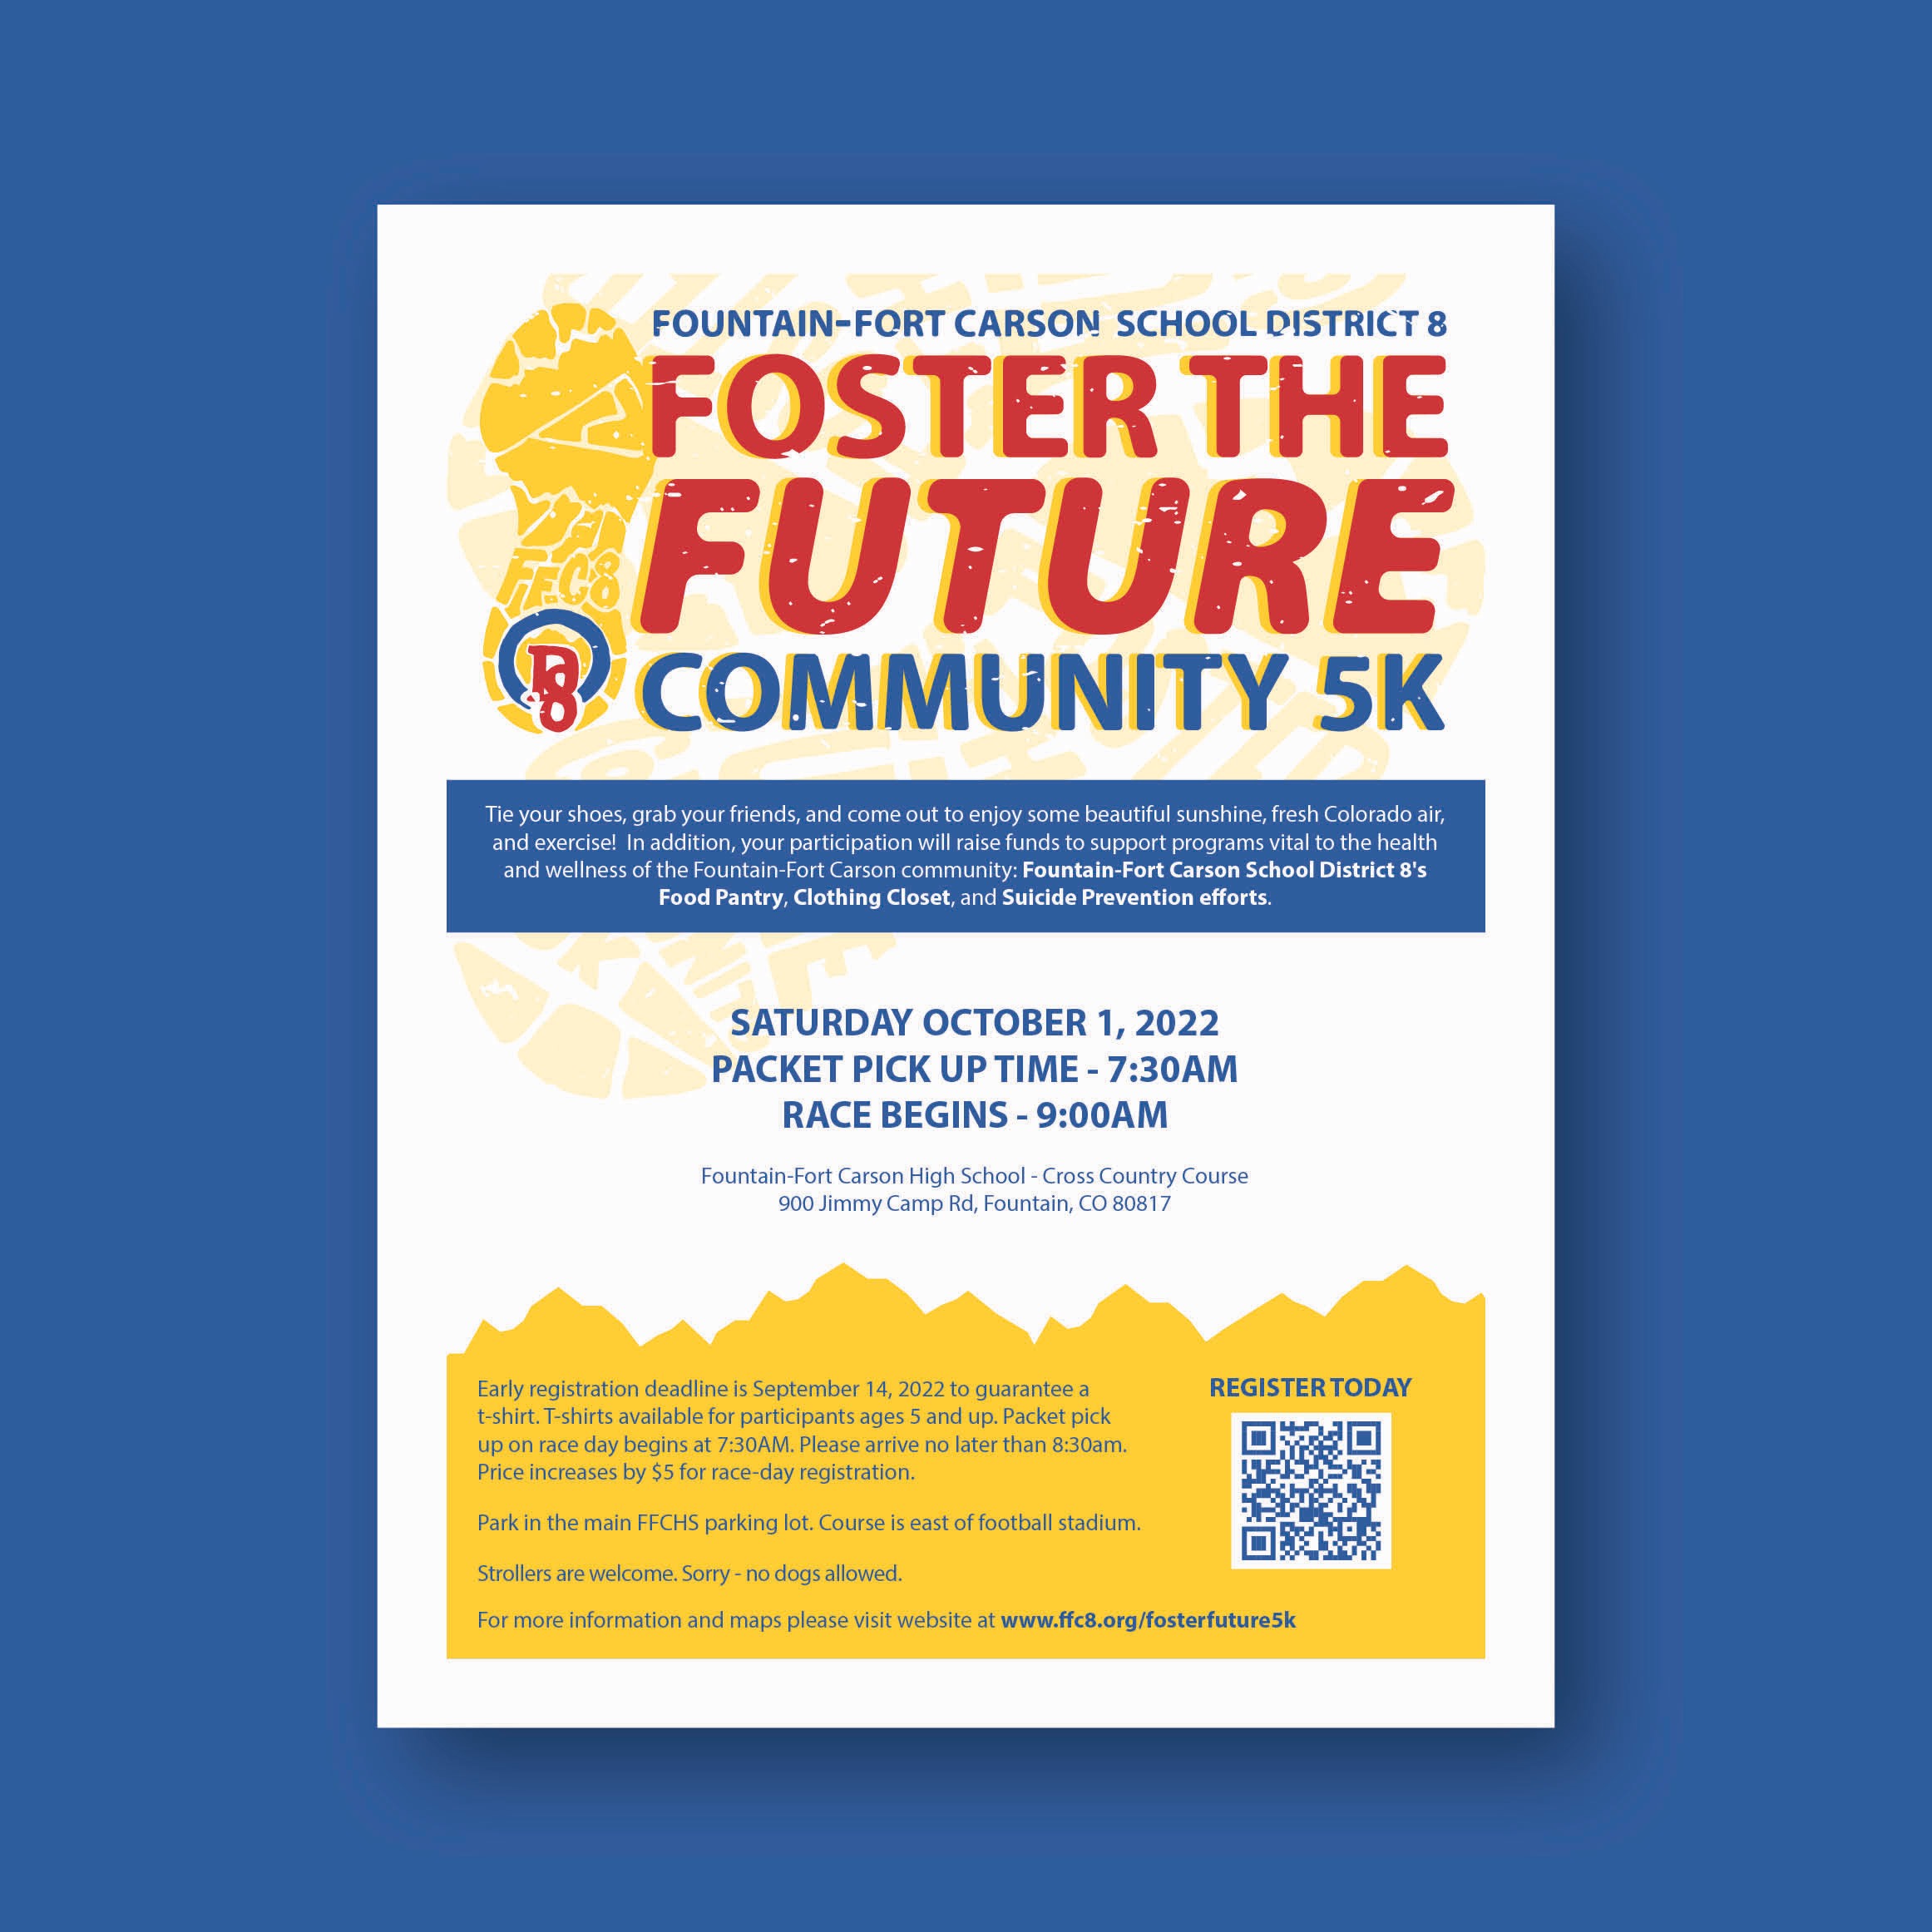 community 5k foster the future flyer